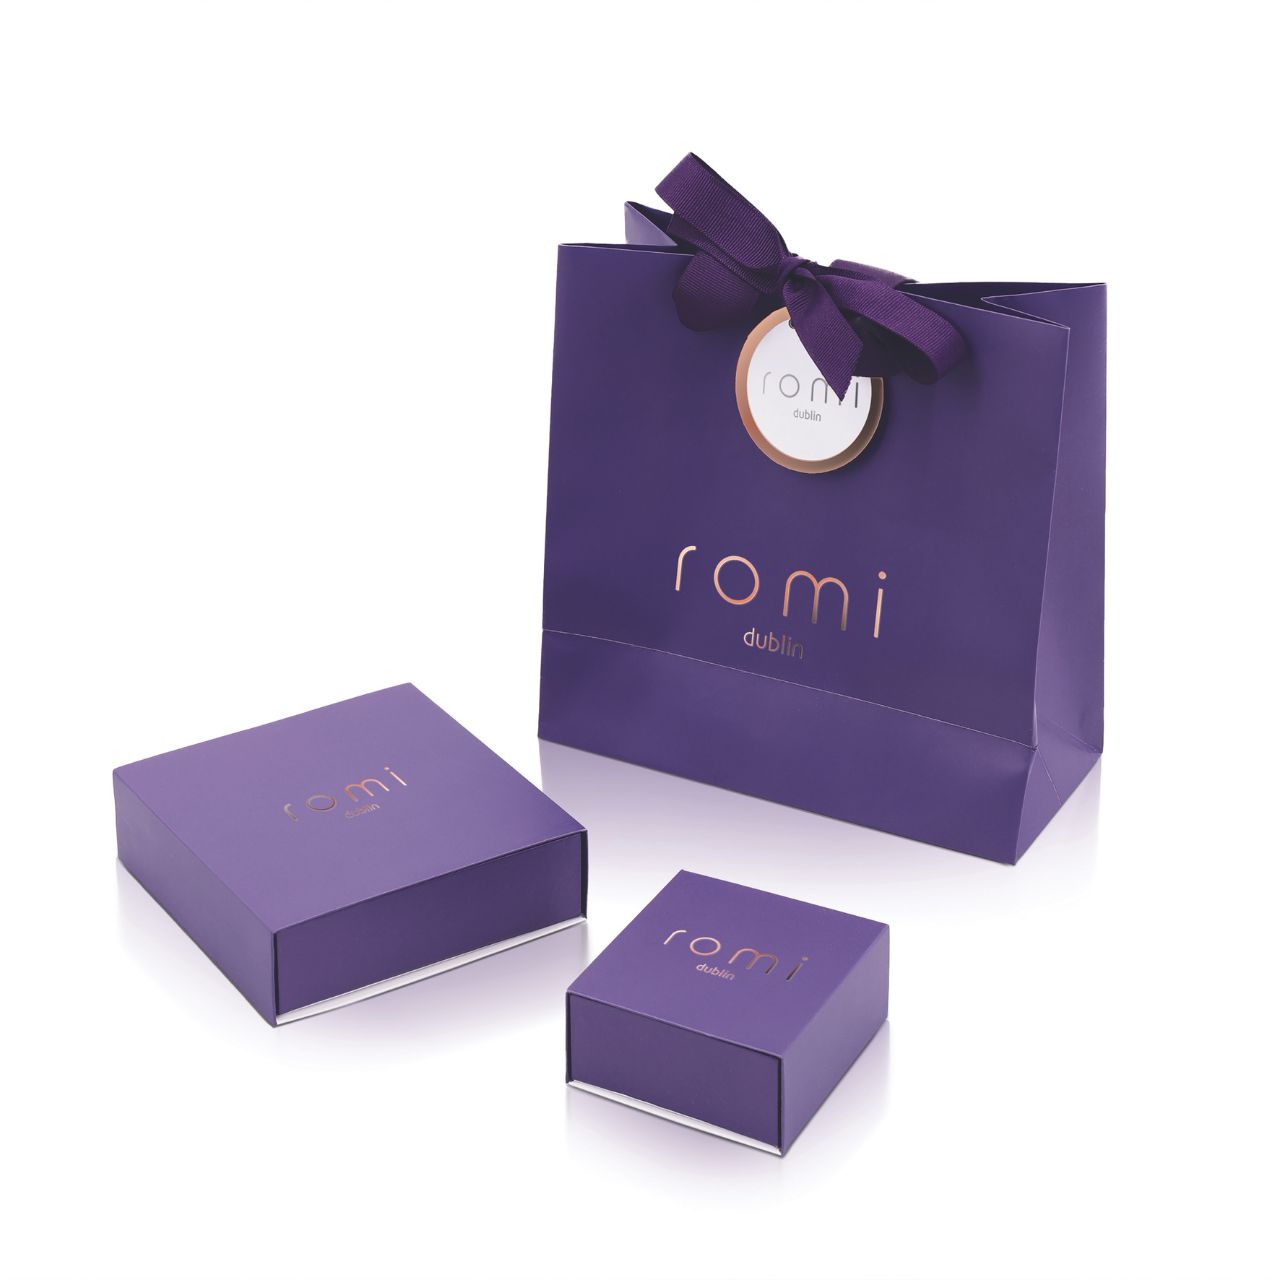 Romi Dublin Silver Purple Interlocking Pendant  This easy-to-wear jewellery collection was inspired by daughter Romi who loves to style and accessorise. An outfit isn’t complete until the perfect pieces of jewellery and accessories have been selected to enhance it.